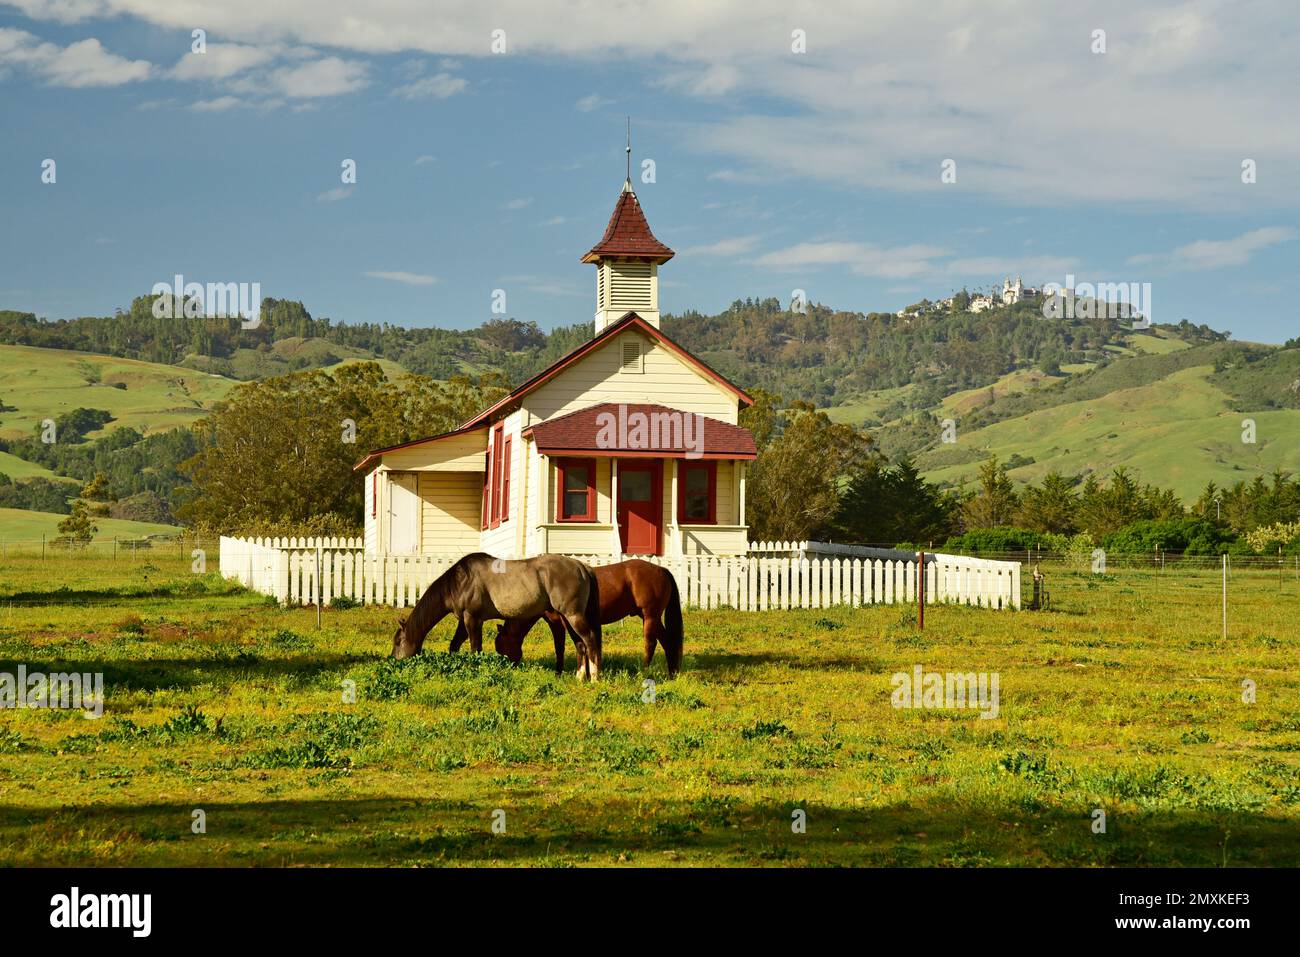 Rural scene with small church-like building and grazing horses, San Simeon, California. The Hearst Castle is on the top of the hill in the background. Stock Photo